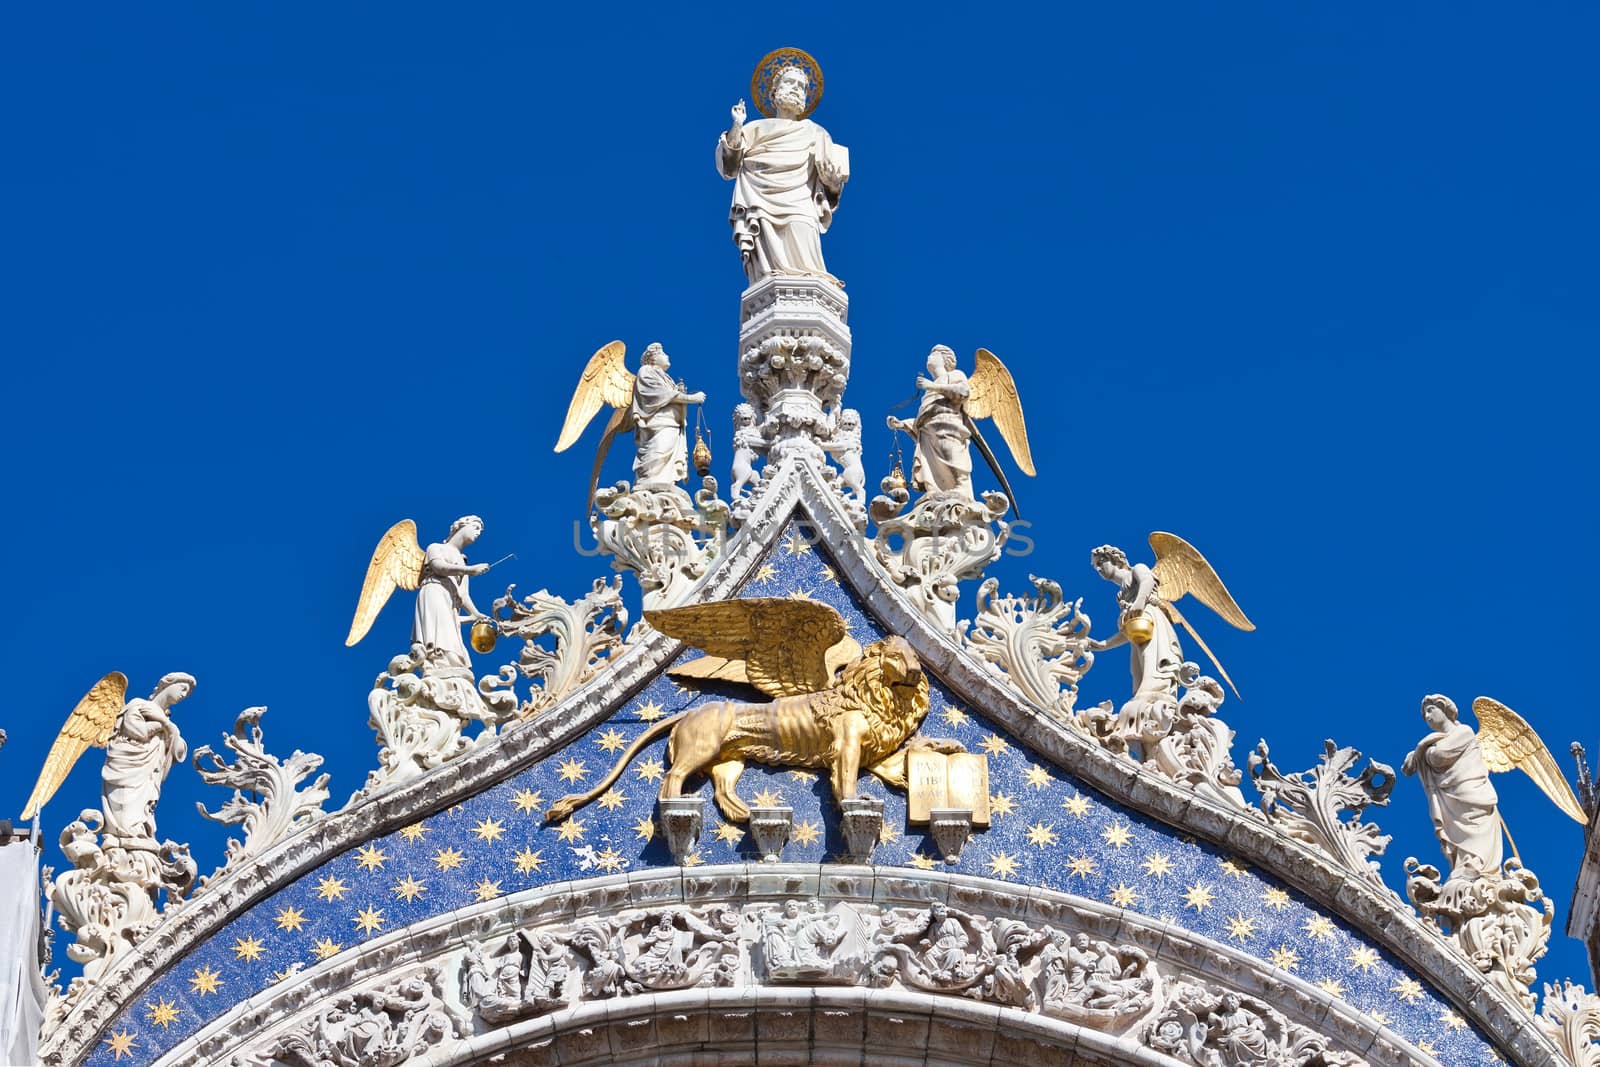 Famous San Marco Cathedral  in Venice, Italy